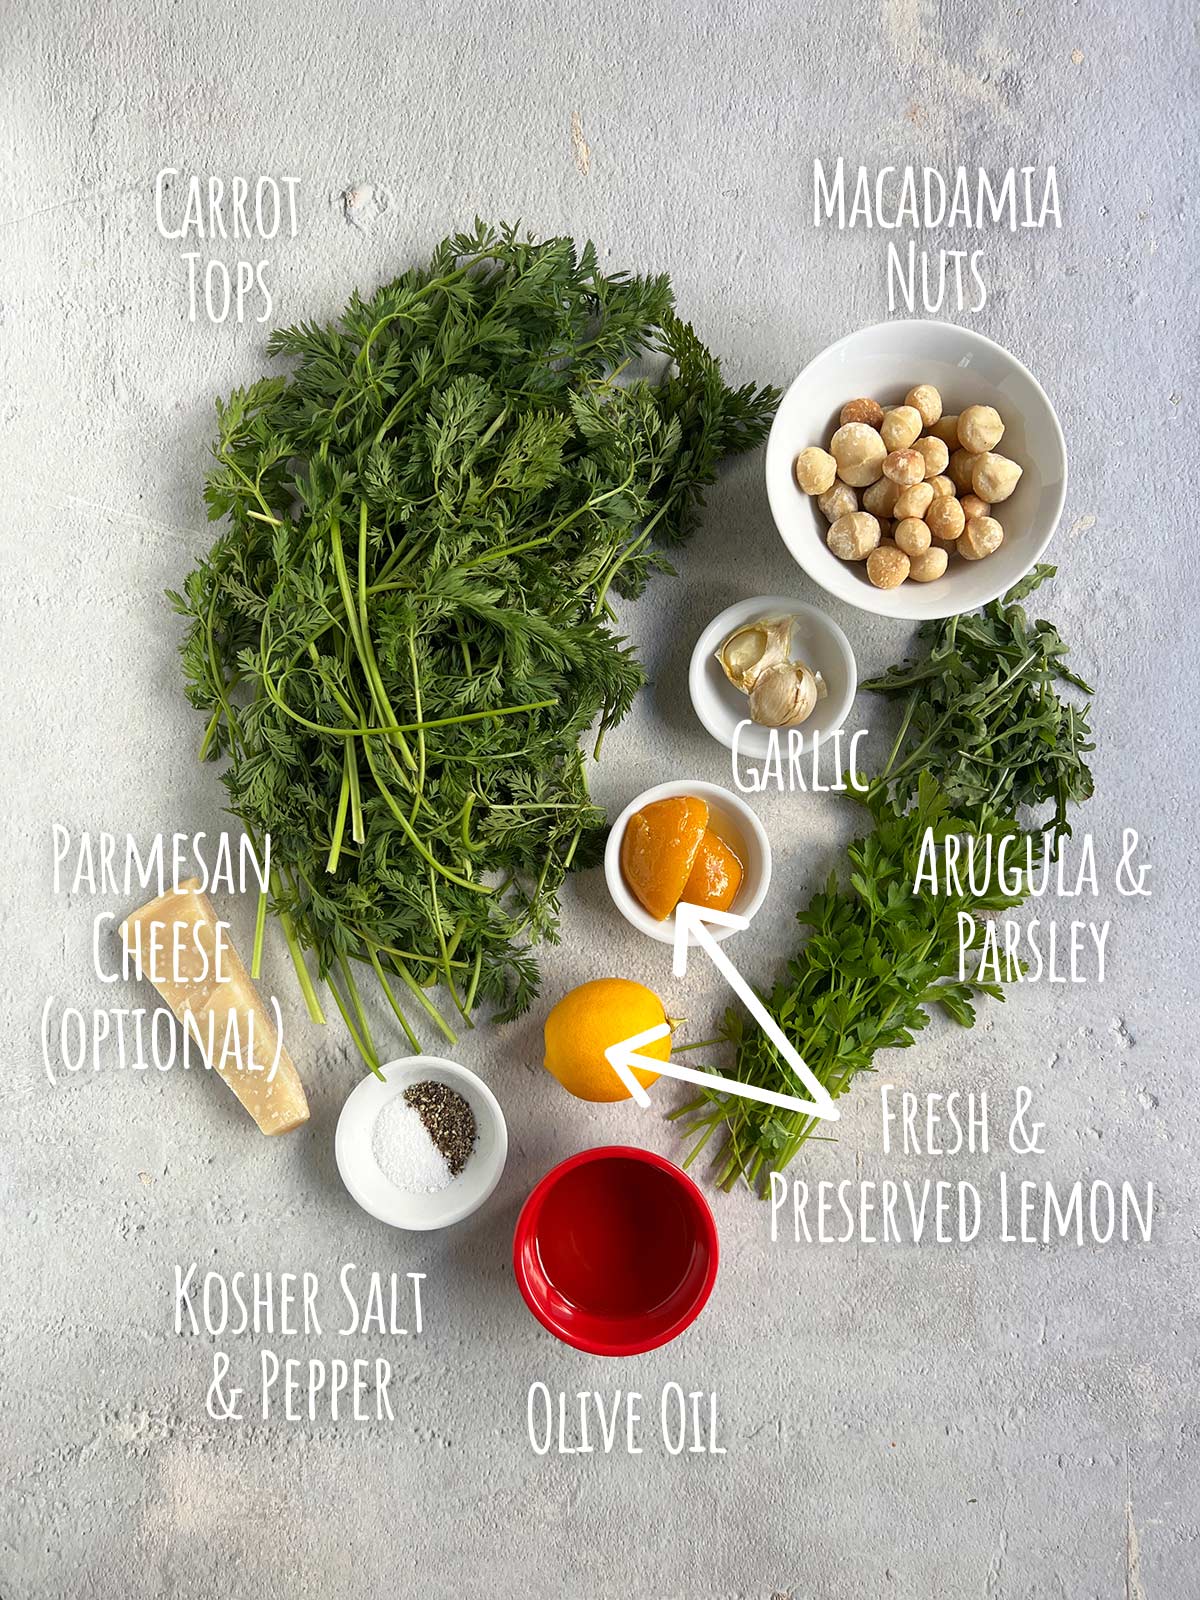 Ingredient shot for carrot top pesto showing carrot tops in the upper left with all the other ingredients to the right of them.